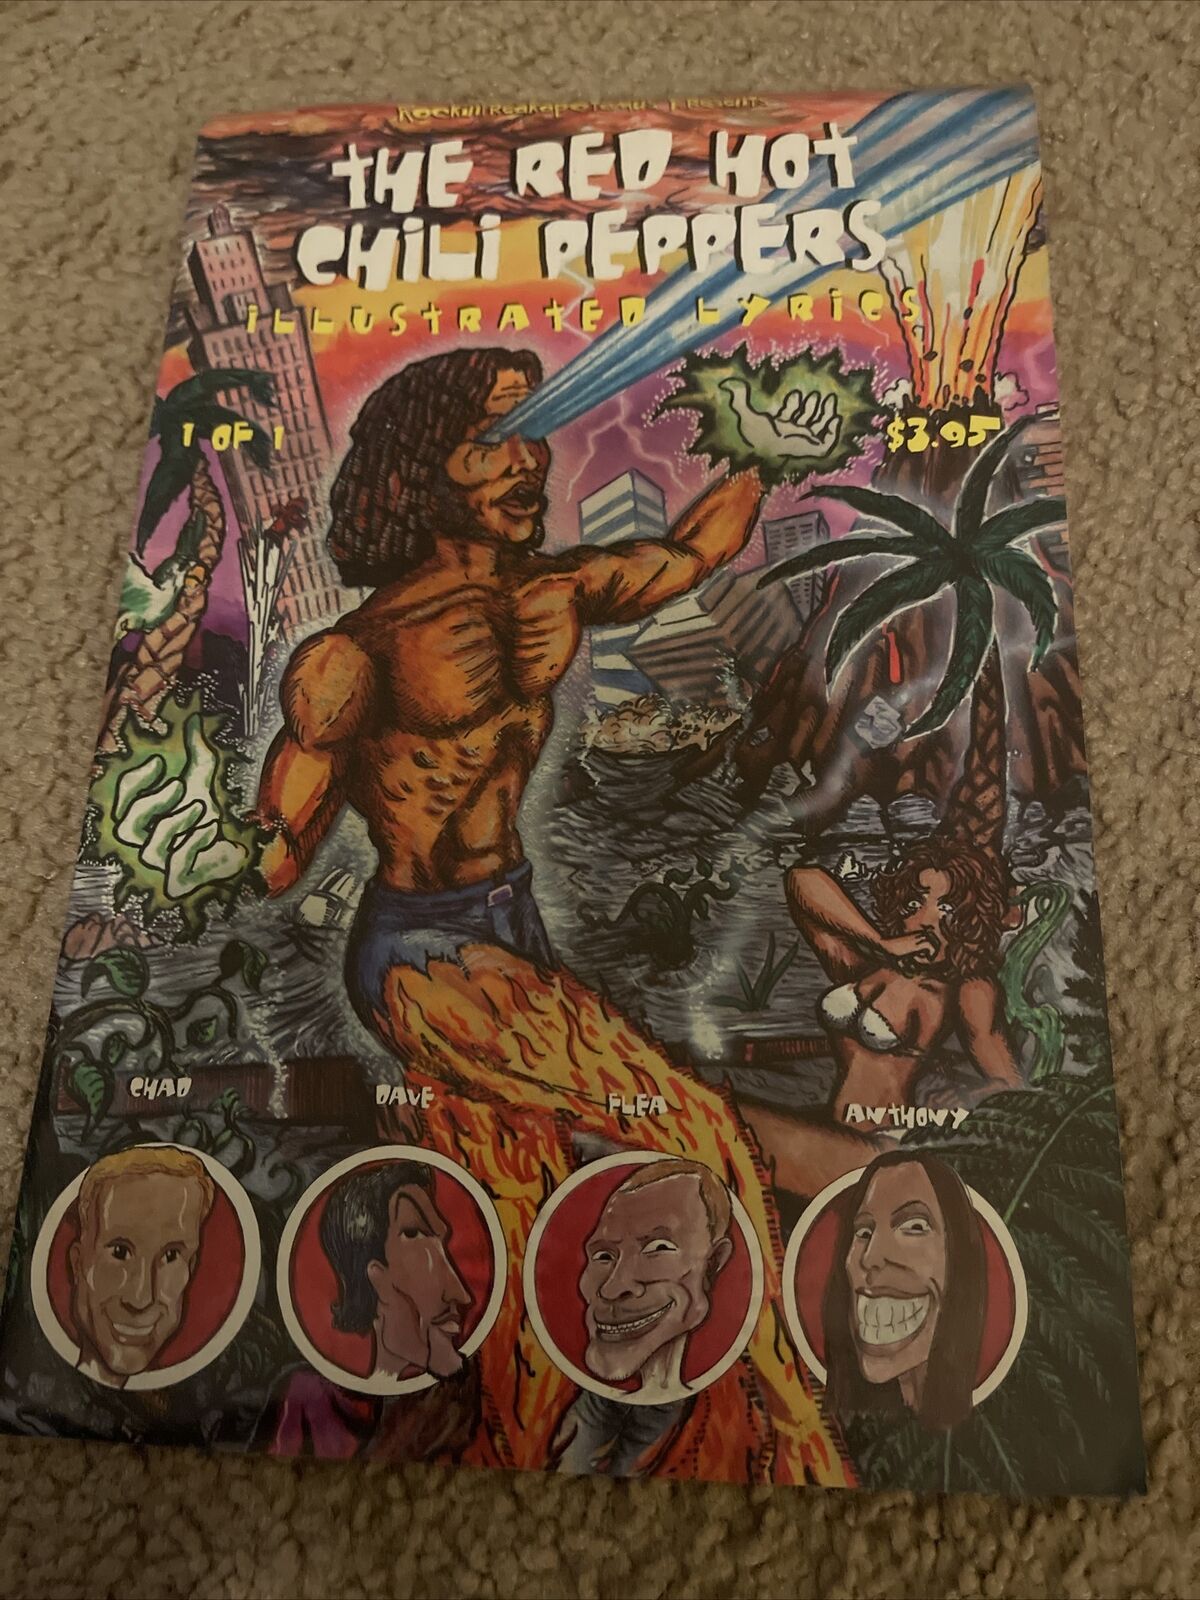 RED HOT CHILI PEPPERS Illustrated Lyrics #1 Rare Rock Comic Book 1997 1st Print